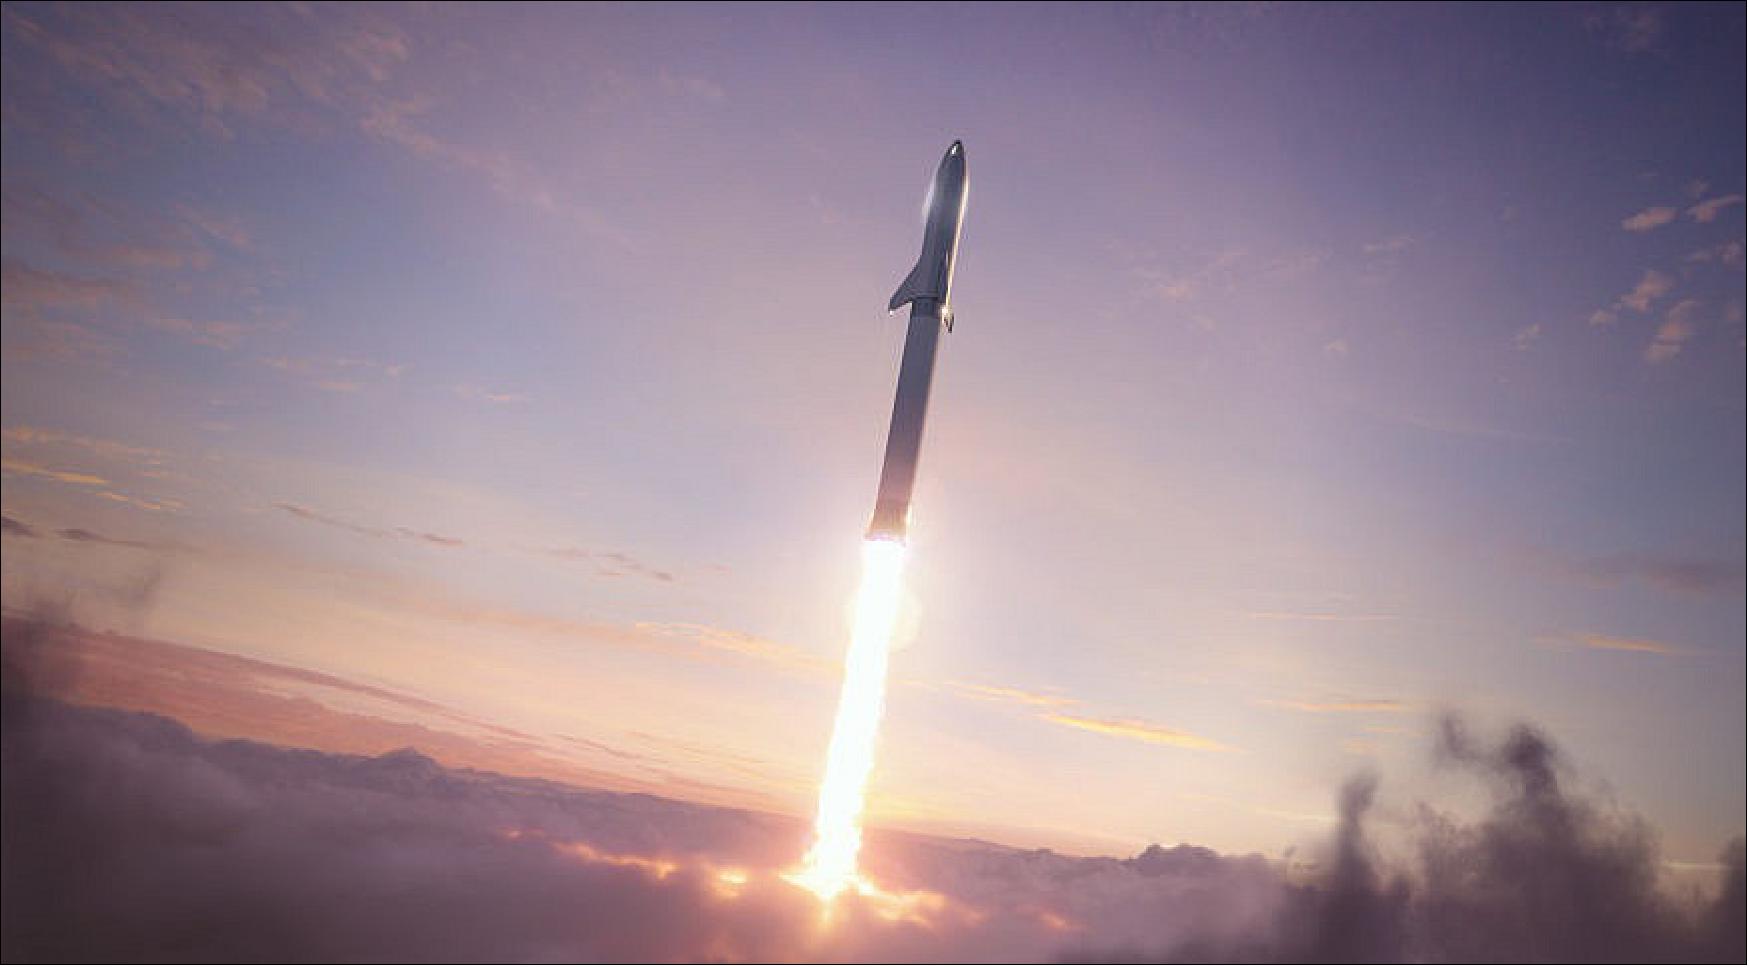 Figure 12: The first commercial Starship/Super Heavy mission will likely carry a telecommunications satellite (image credit: SpaceX)